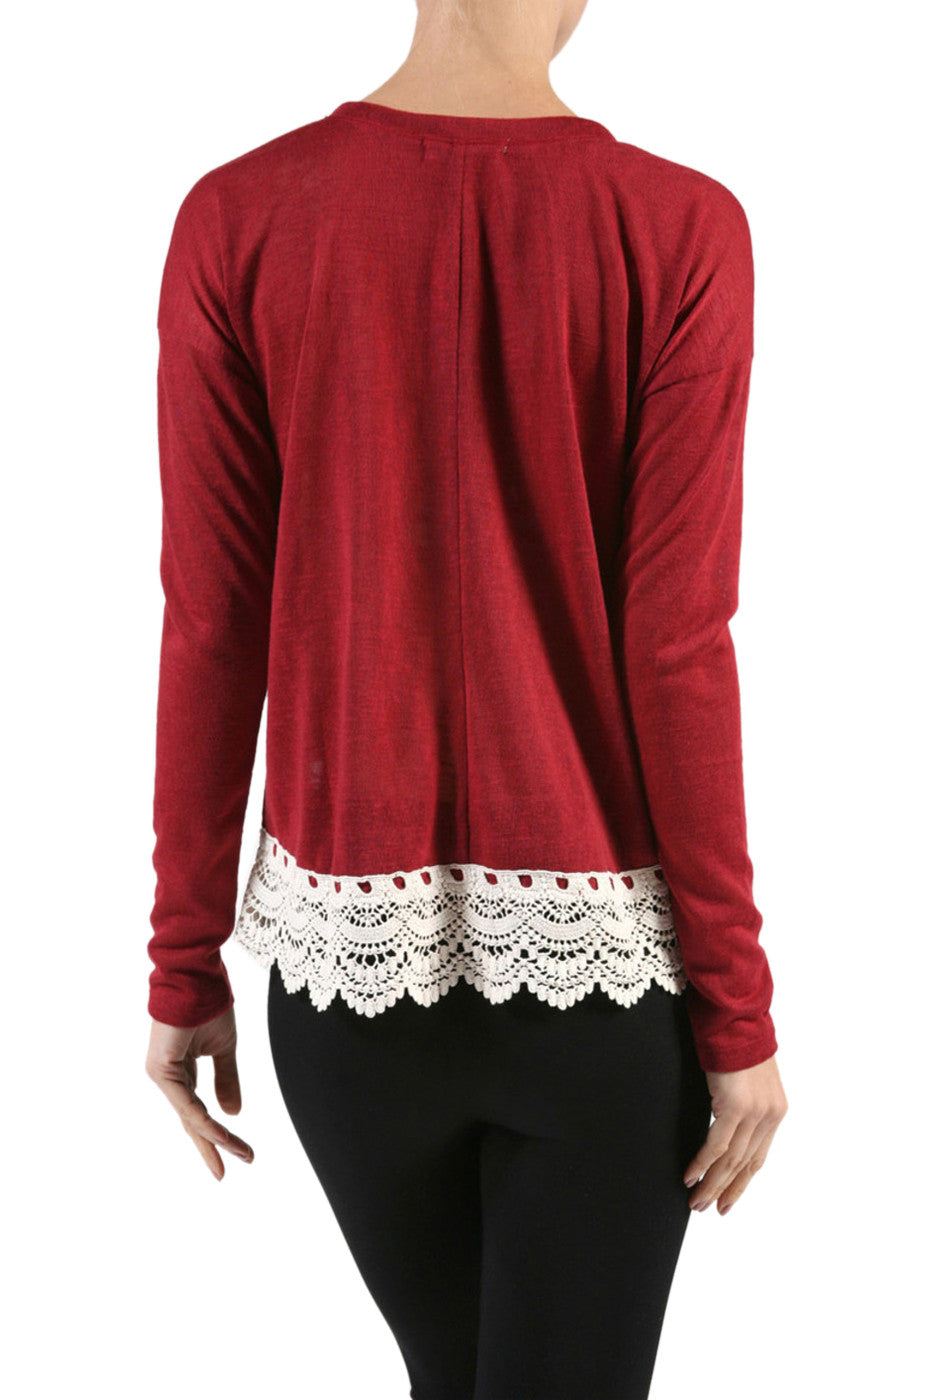 Pale Taupe Long Sleeve Sweater With Burgundy Leging And Leopard